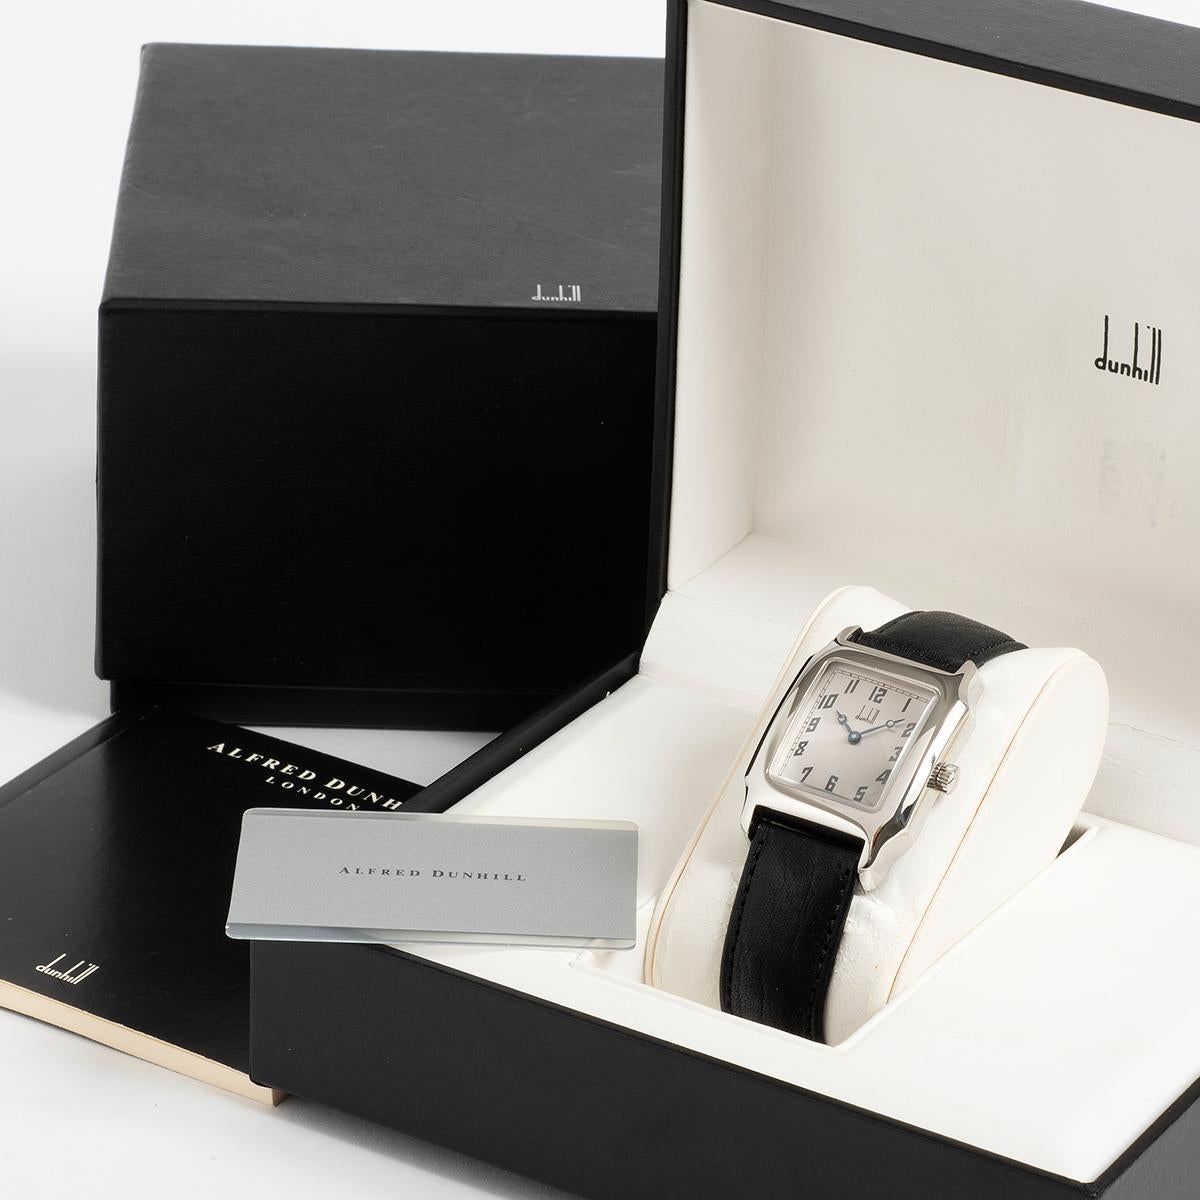 Our Dunhill LTMV art deco style watch was part of the centenary range, launched in 1993 to celebrate 100 years of the Dunhill company. A rare neo vintage quartz dress watch, featuring a stainless steel 28 x 40mm case with very attractive silver/